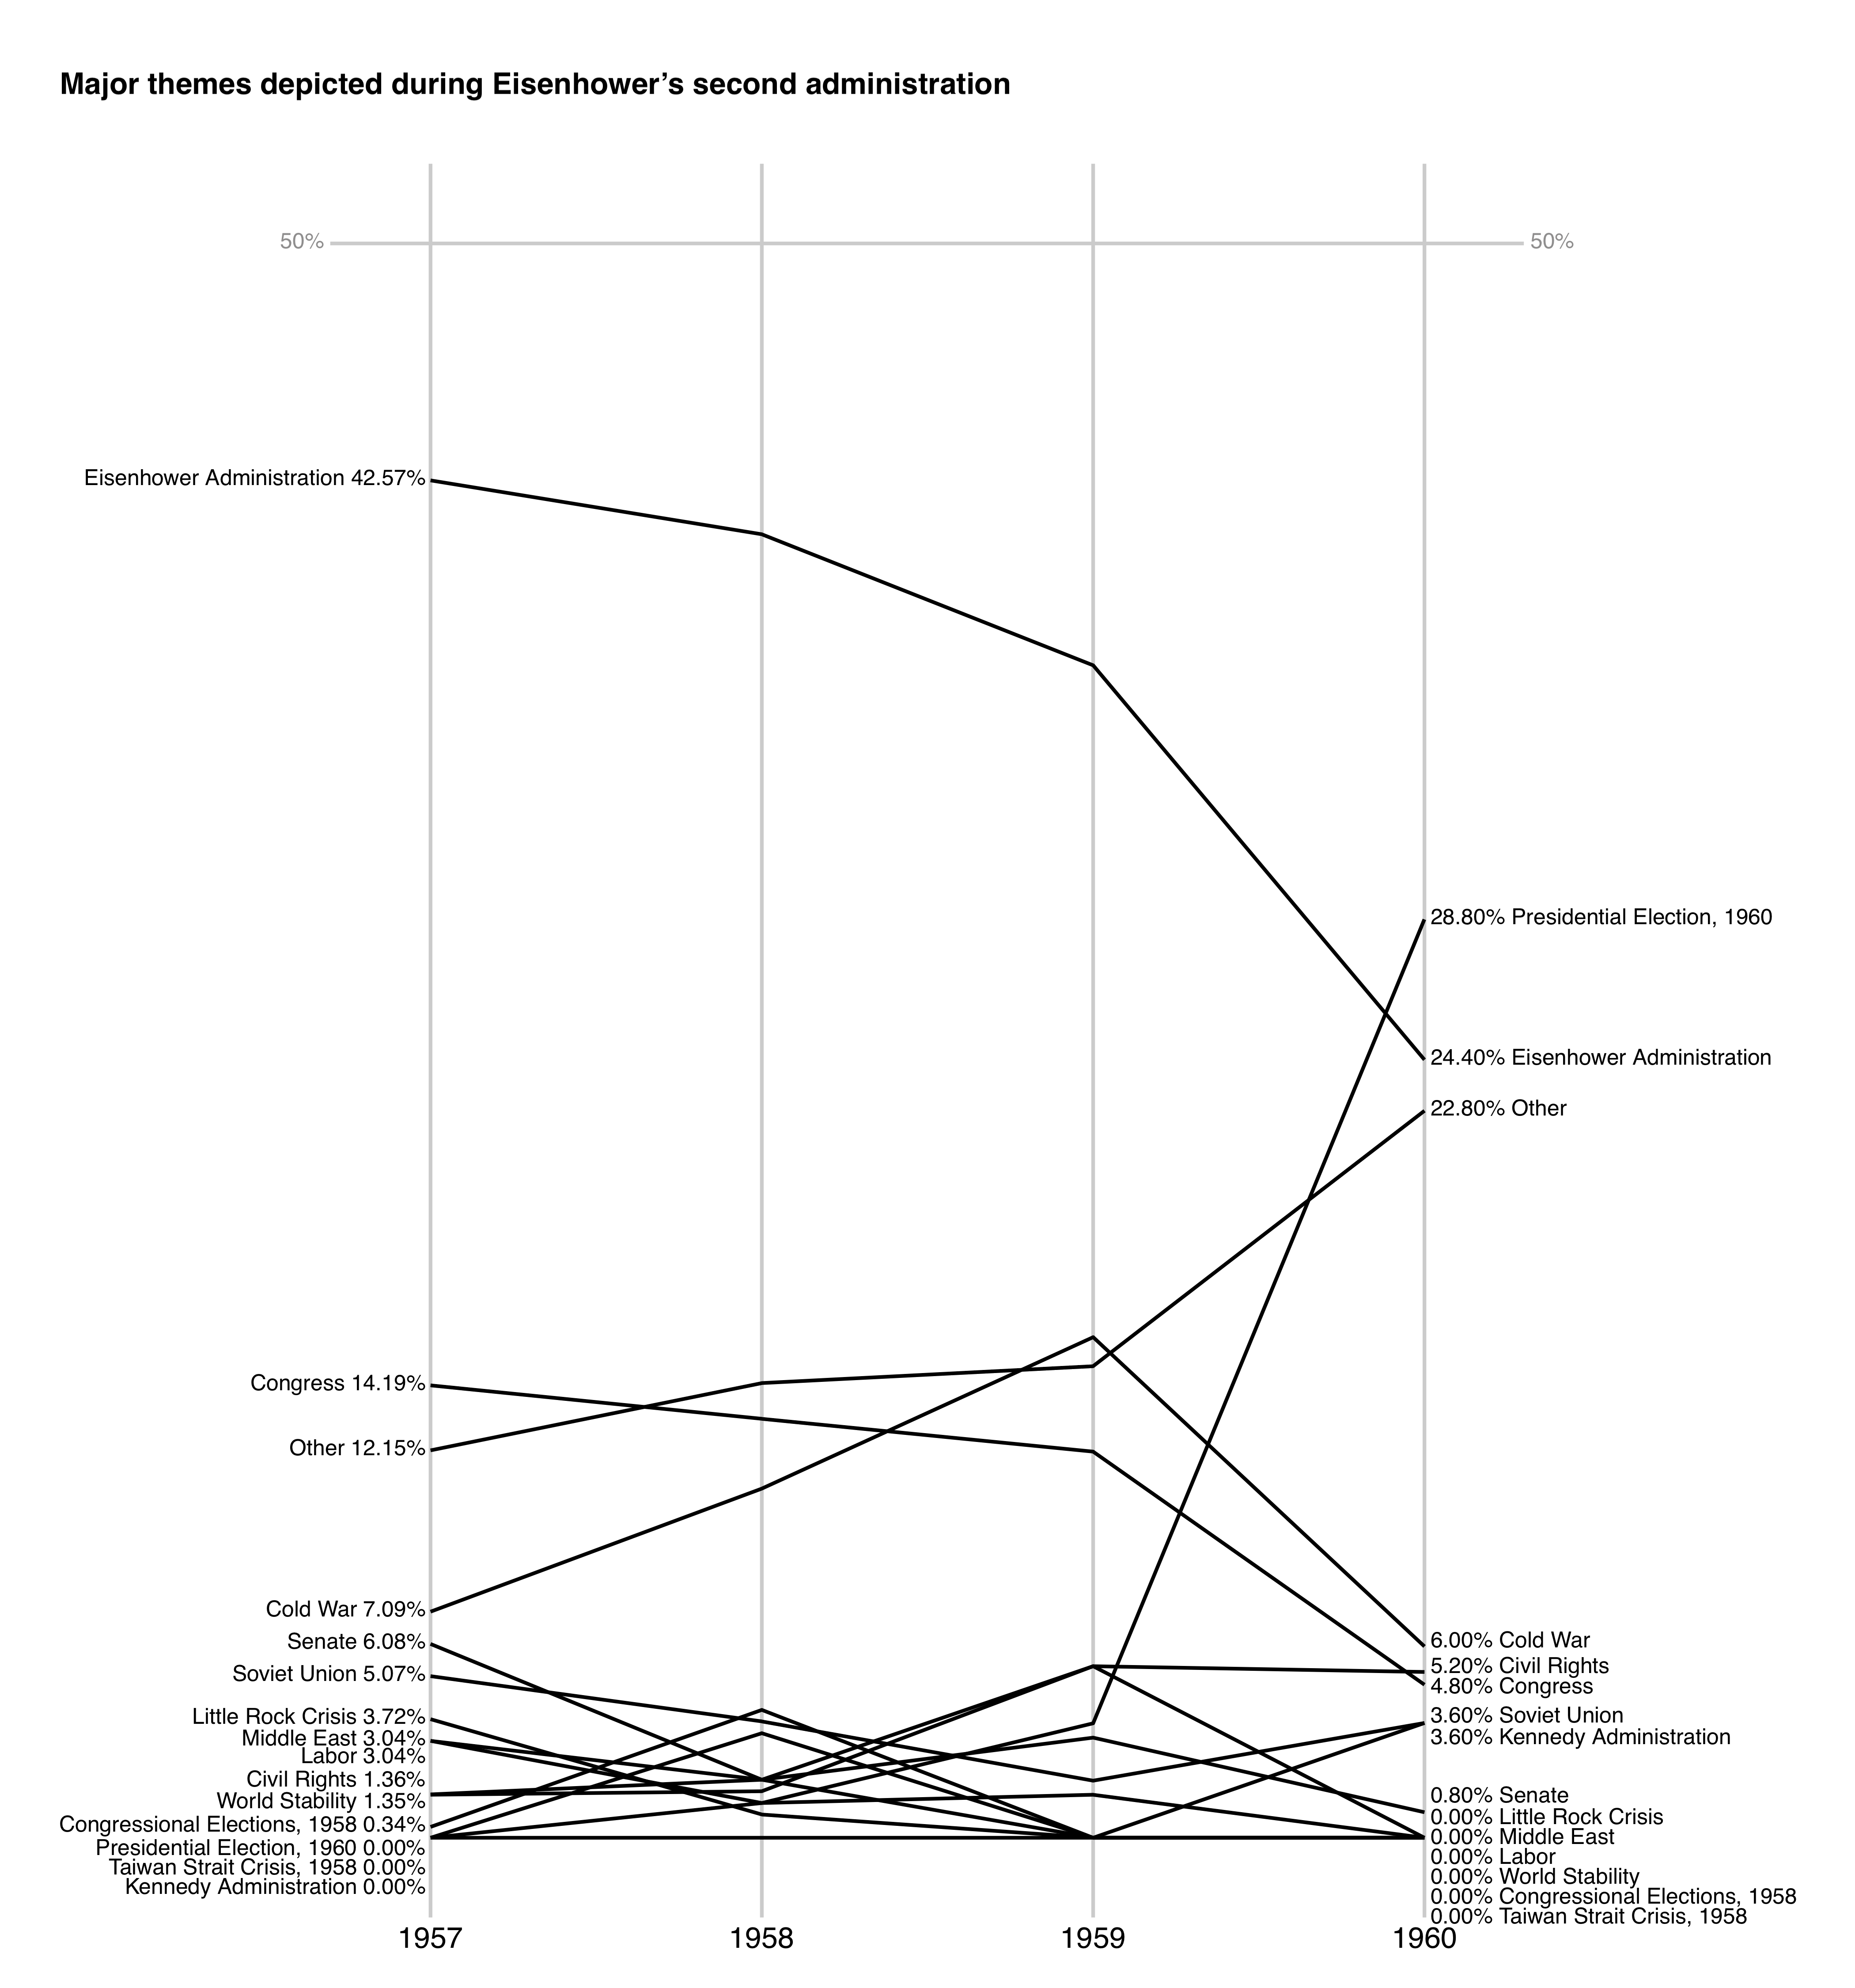 Slopegraph showing how the major subjects depicted in Herblock cartoons changed during Eisenhower's second adminstration, from nineteen fifty-seven to nineteen sixty, measured by the percetage of cartoons from each topic in each year.